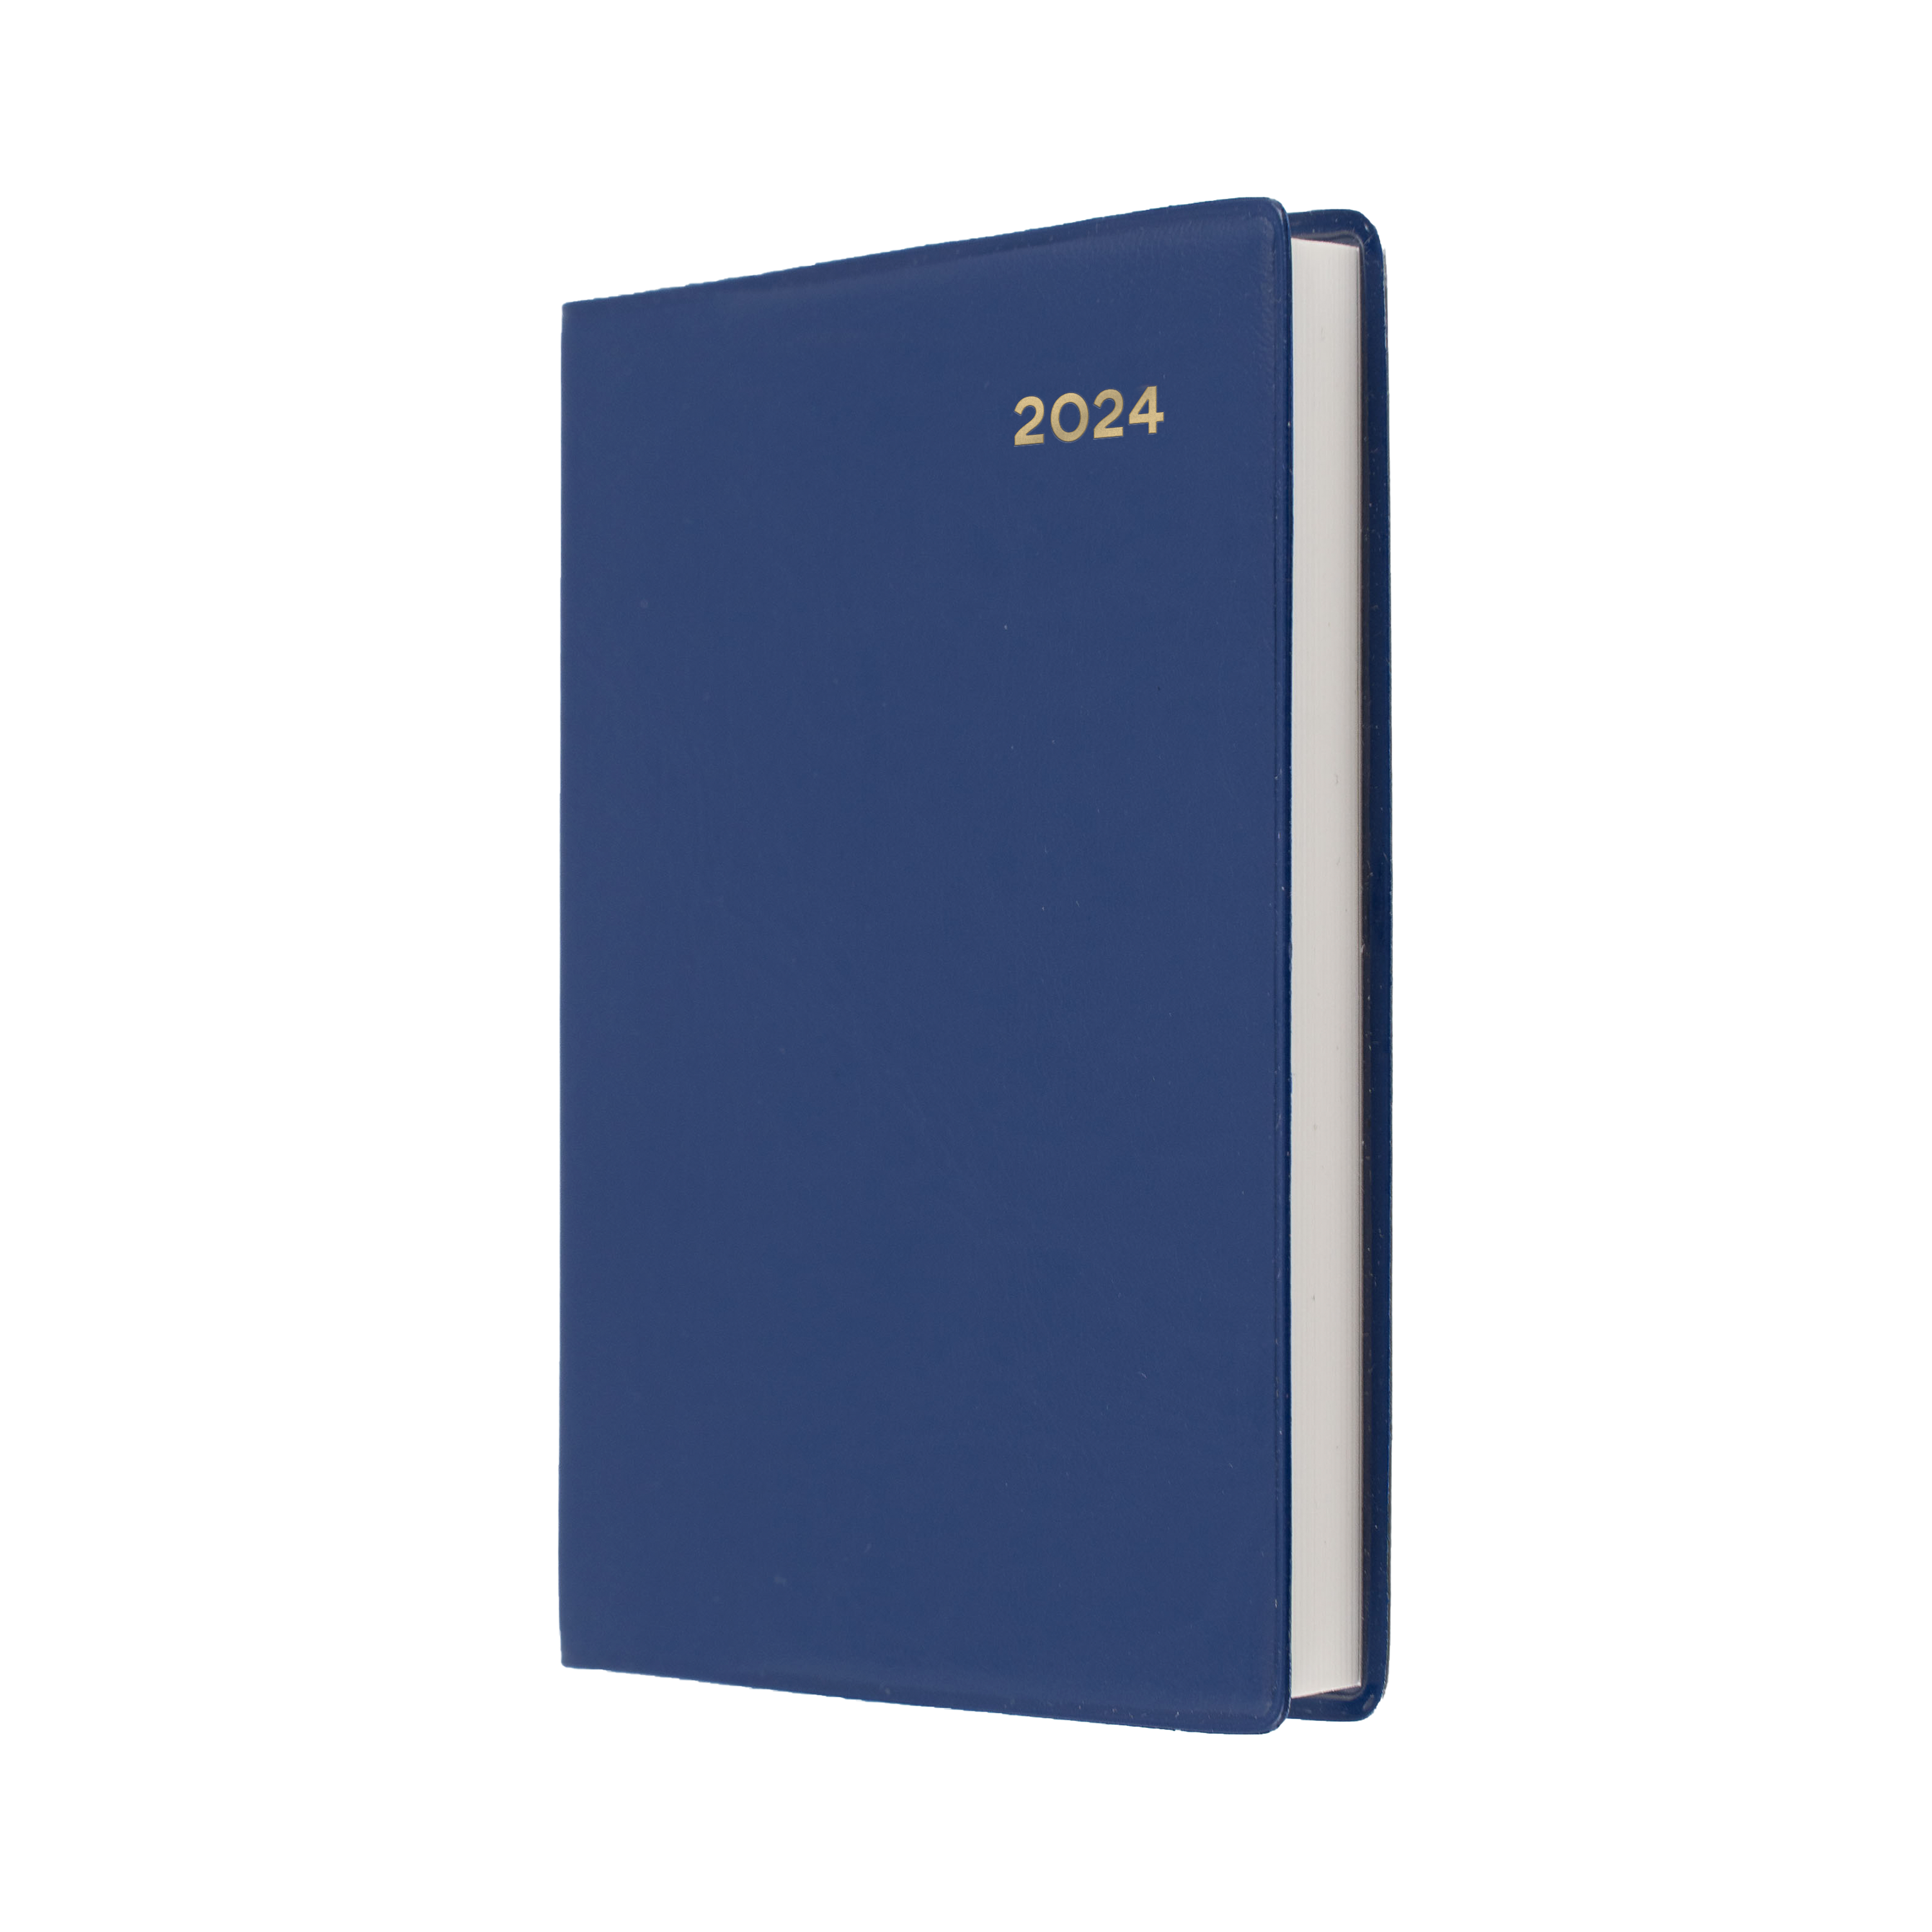 Belmont Pocket 2024 Diary - 2 Days to a Page, Size A7 Navy / A7 (105 x 74mm)